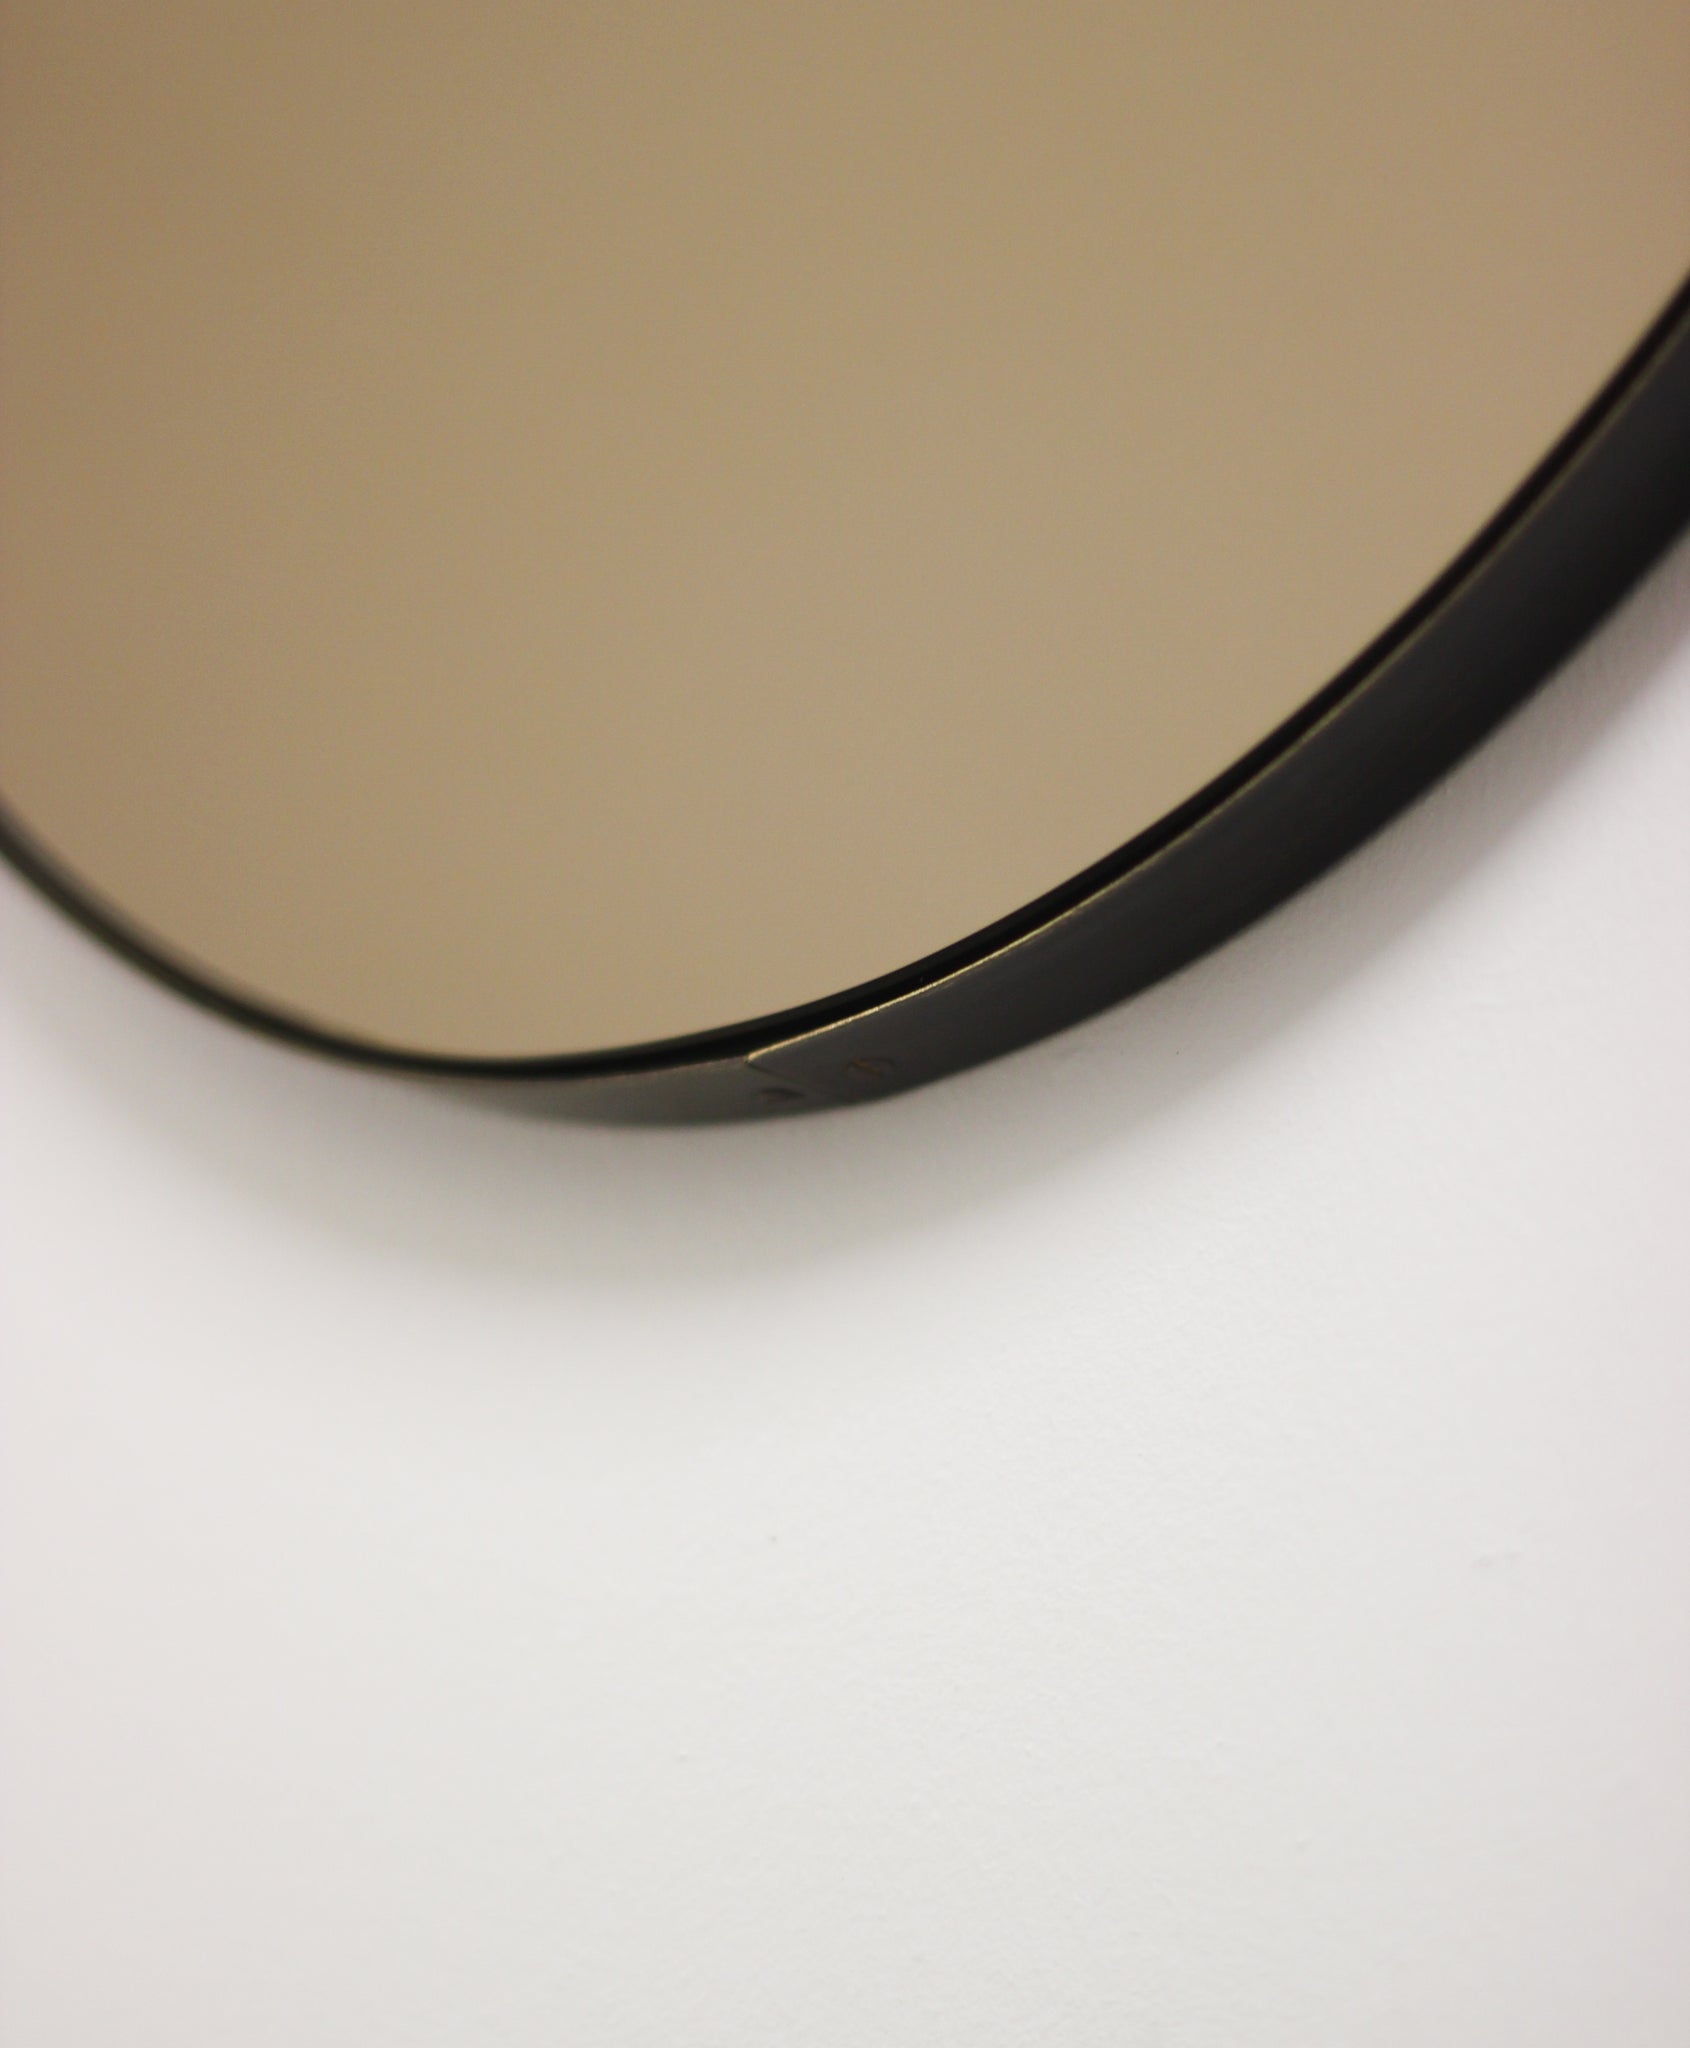 Ovalis Oval Bronze Contemporary Mirror with Brass Patina Frame,Bespoke –  Alguacil & Perkoff